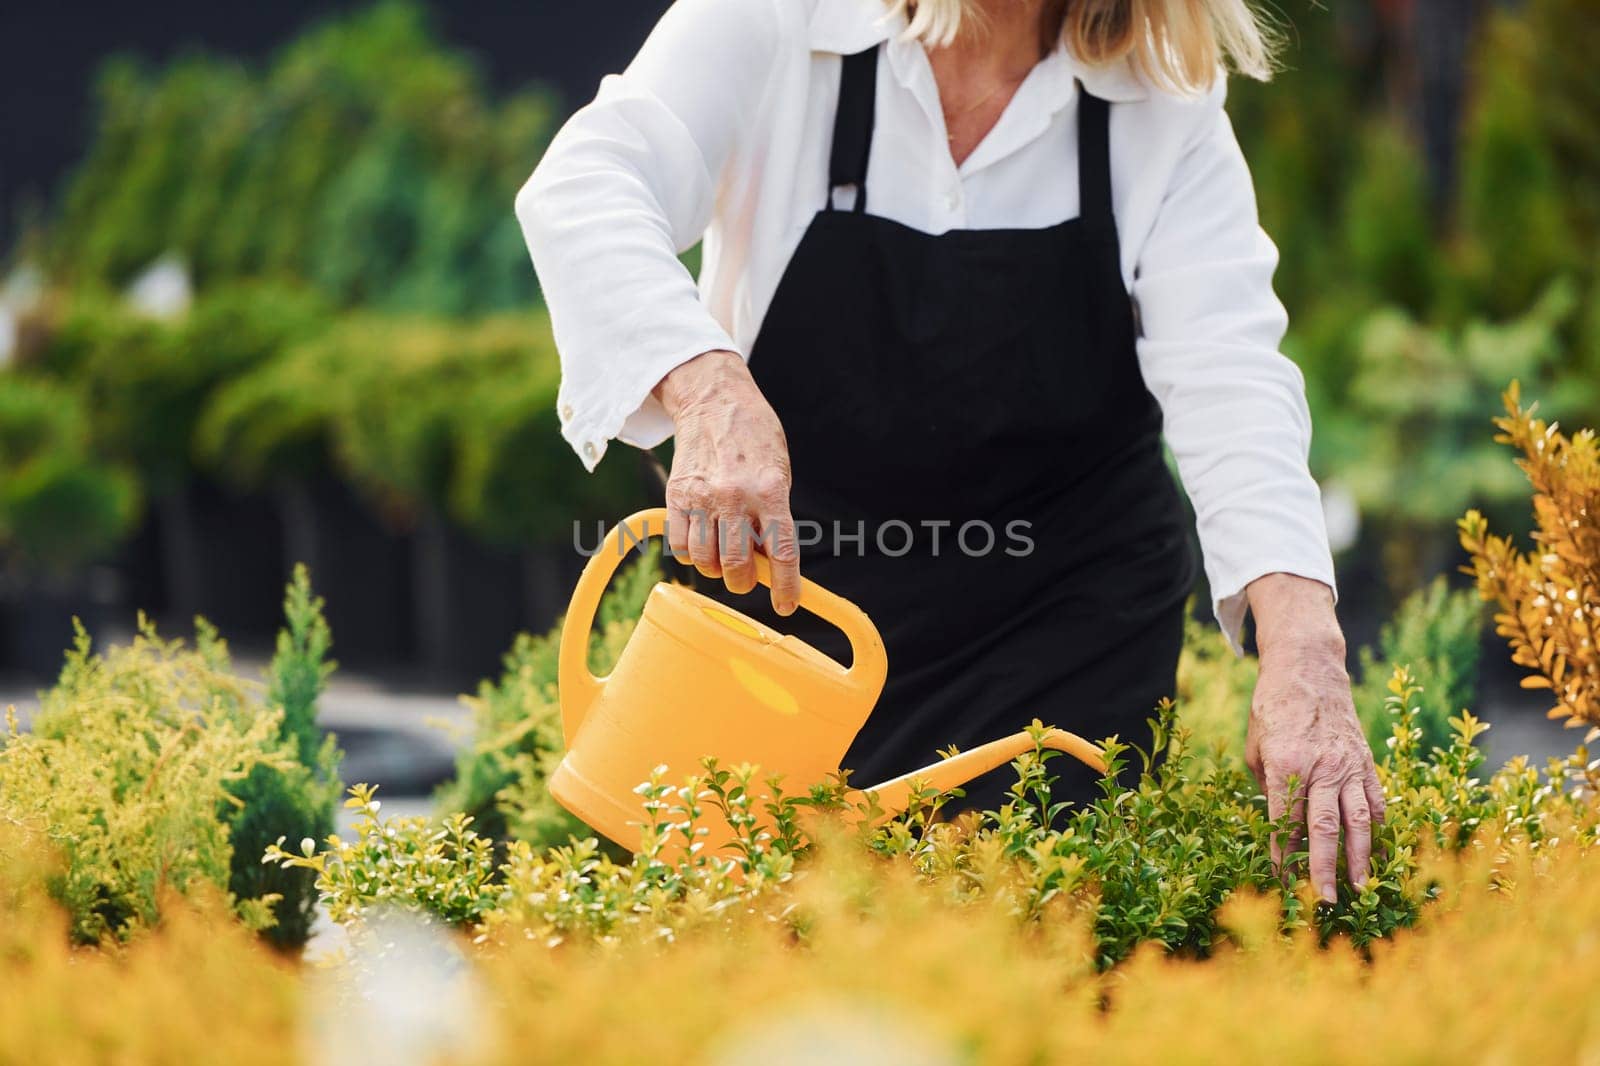 Watering plants. Senior woman is in the garden at daytime by Standret